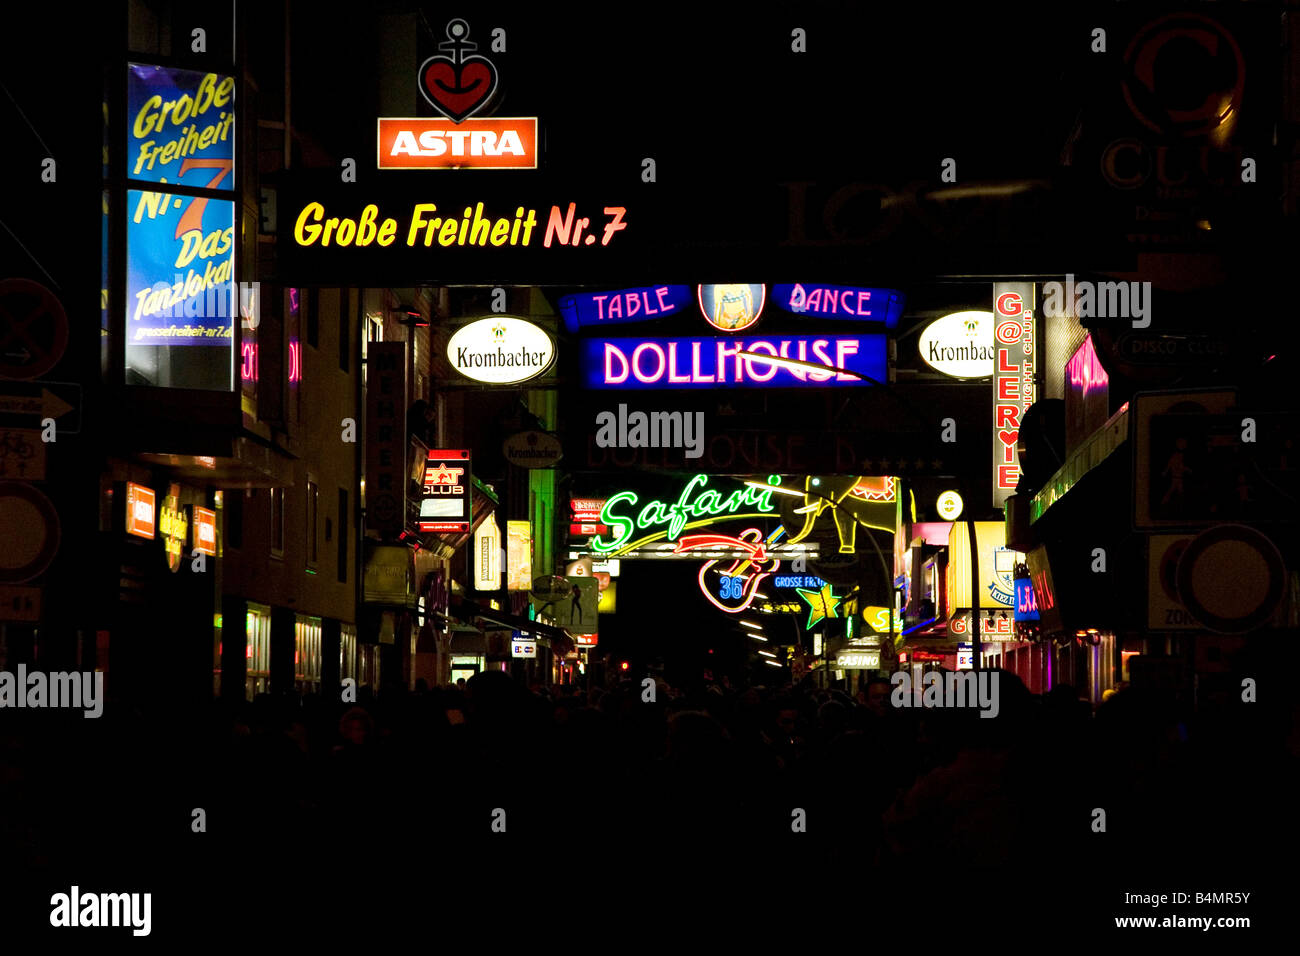 Neon lights and signs for bars and nightclubs on the Grosse Freiheit in Hamburg's St Pauli District. Stock Photo